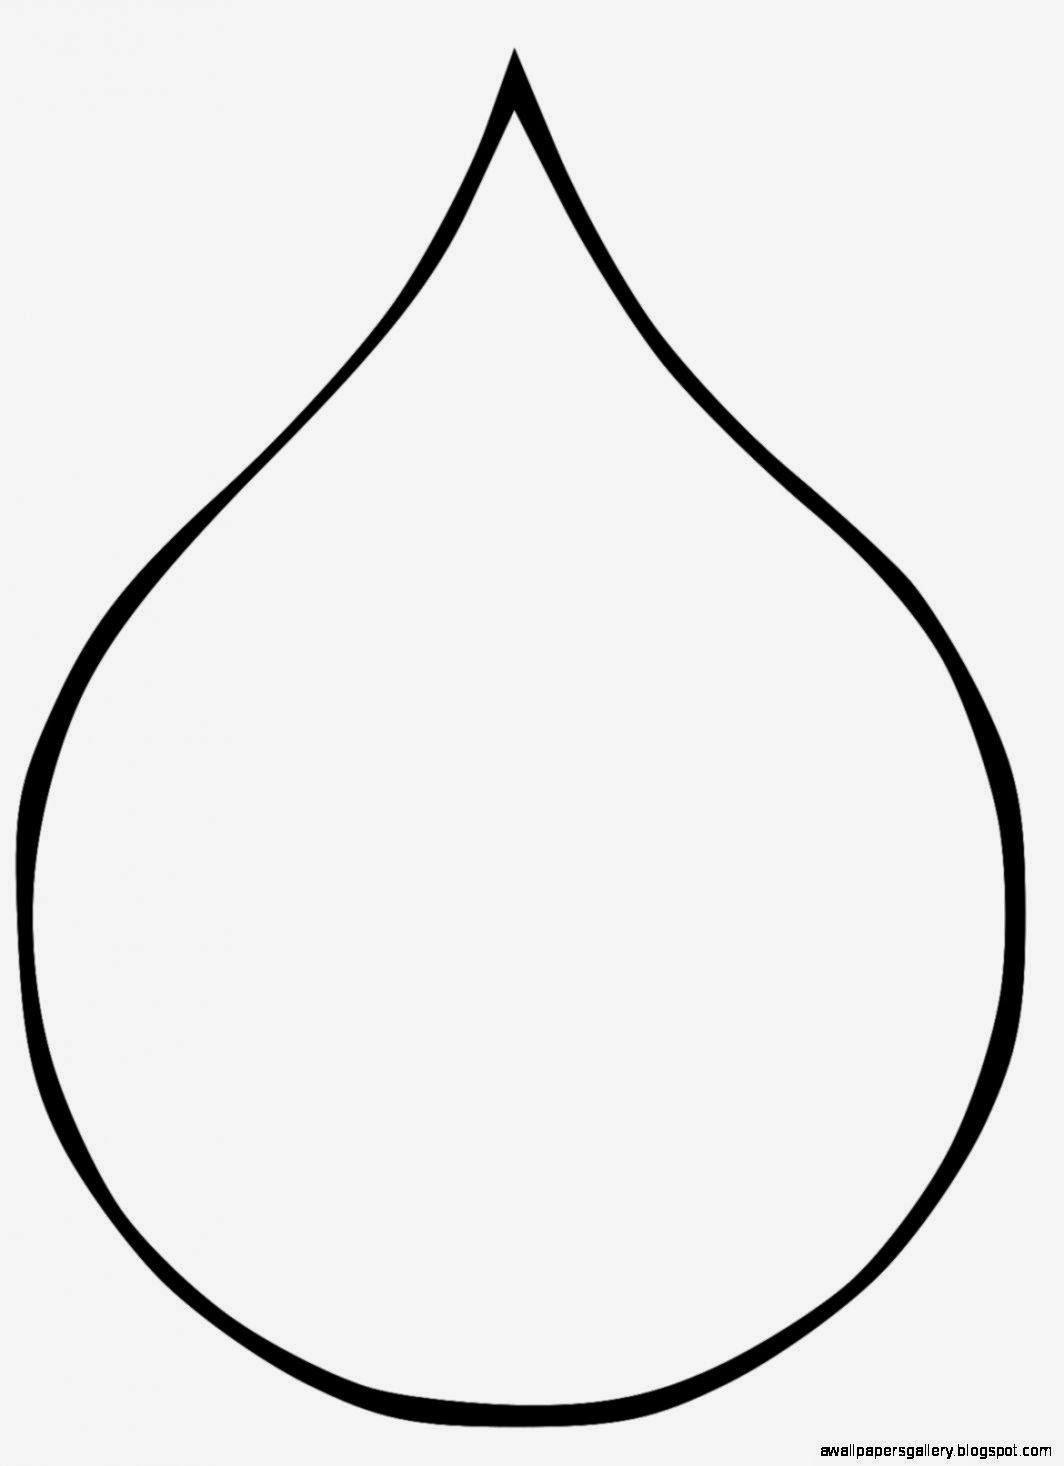 Drop Of Water Clipart Black And White - ClipArt Best